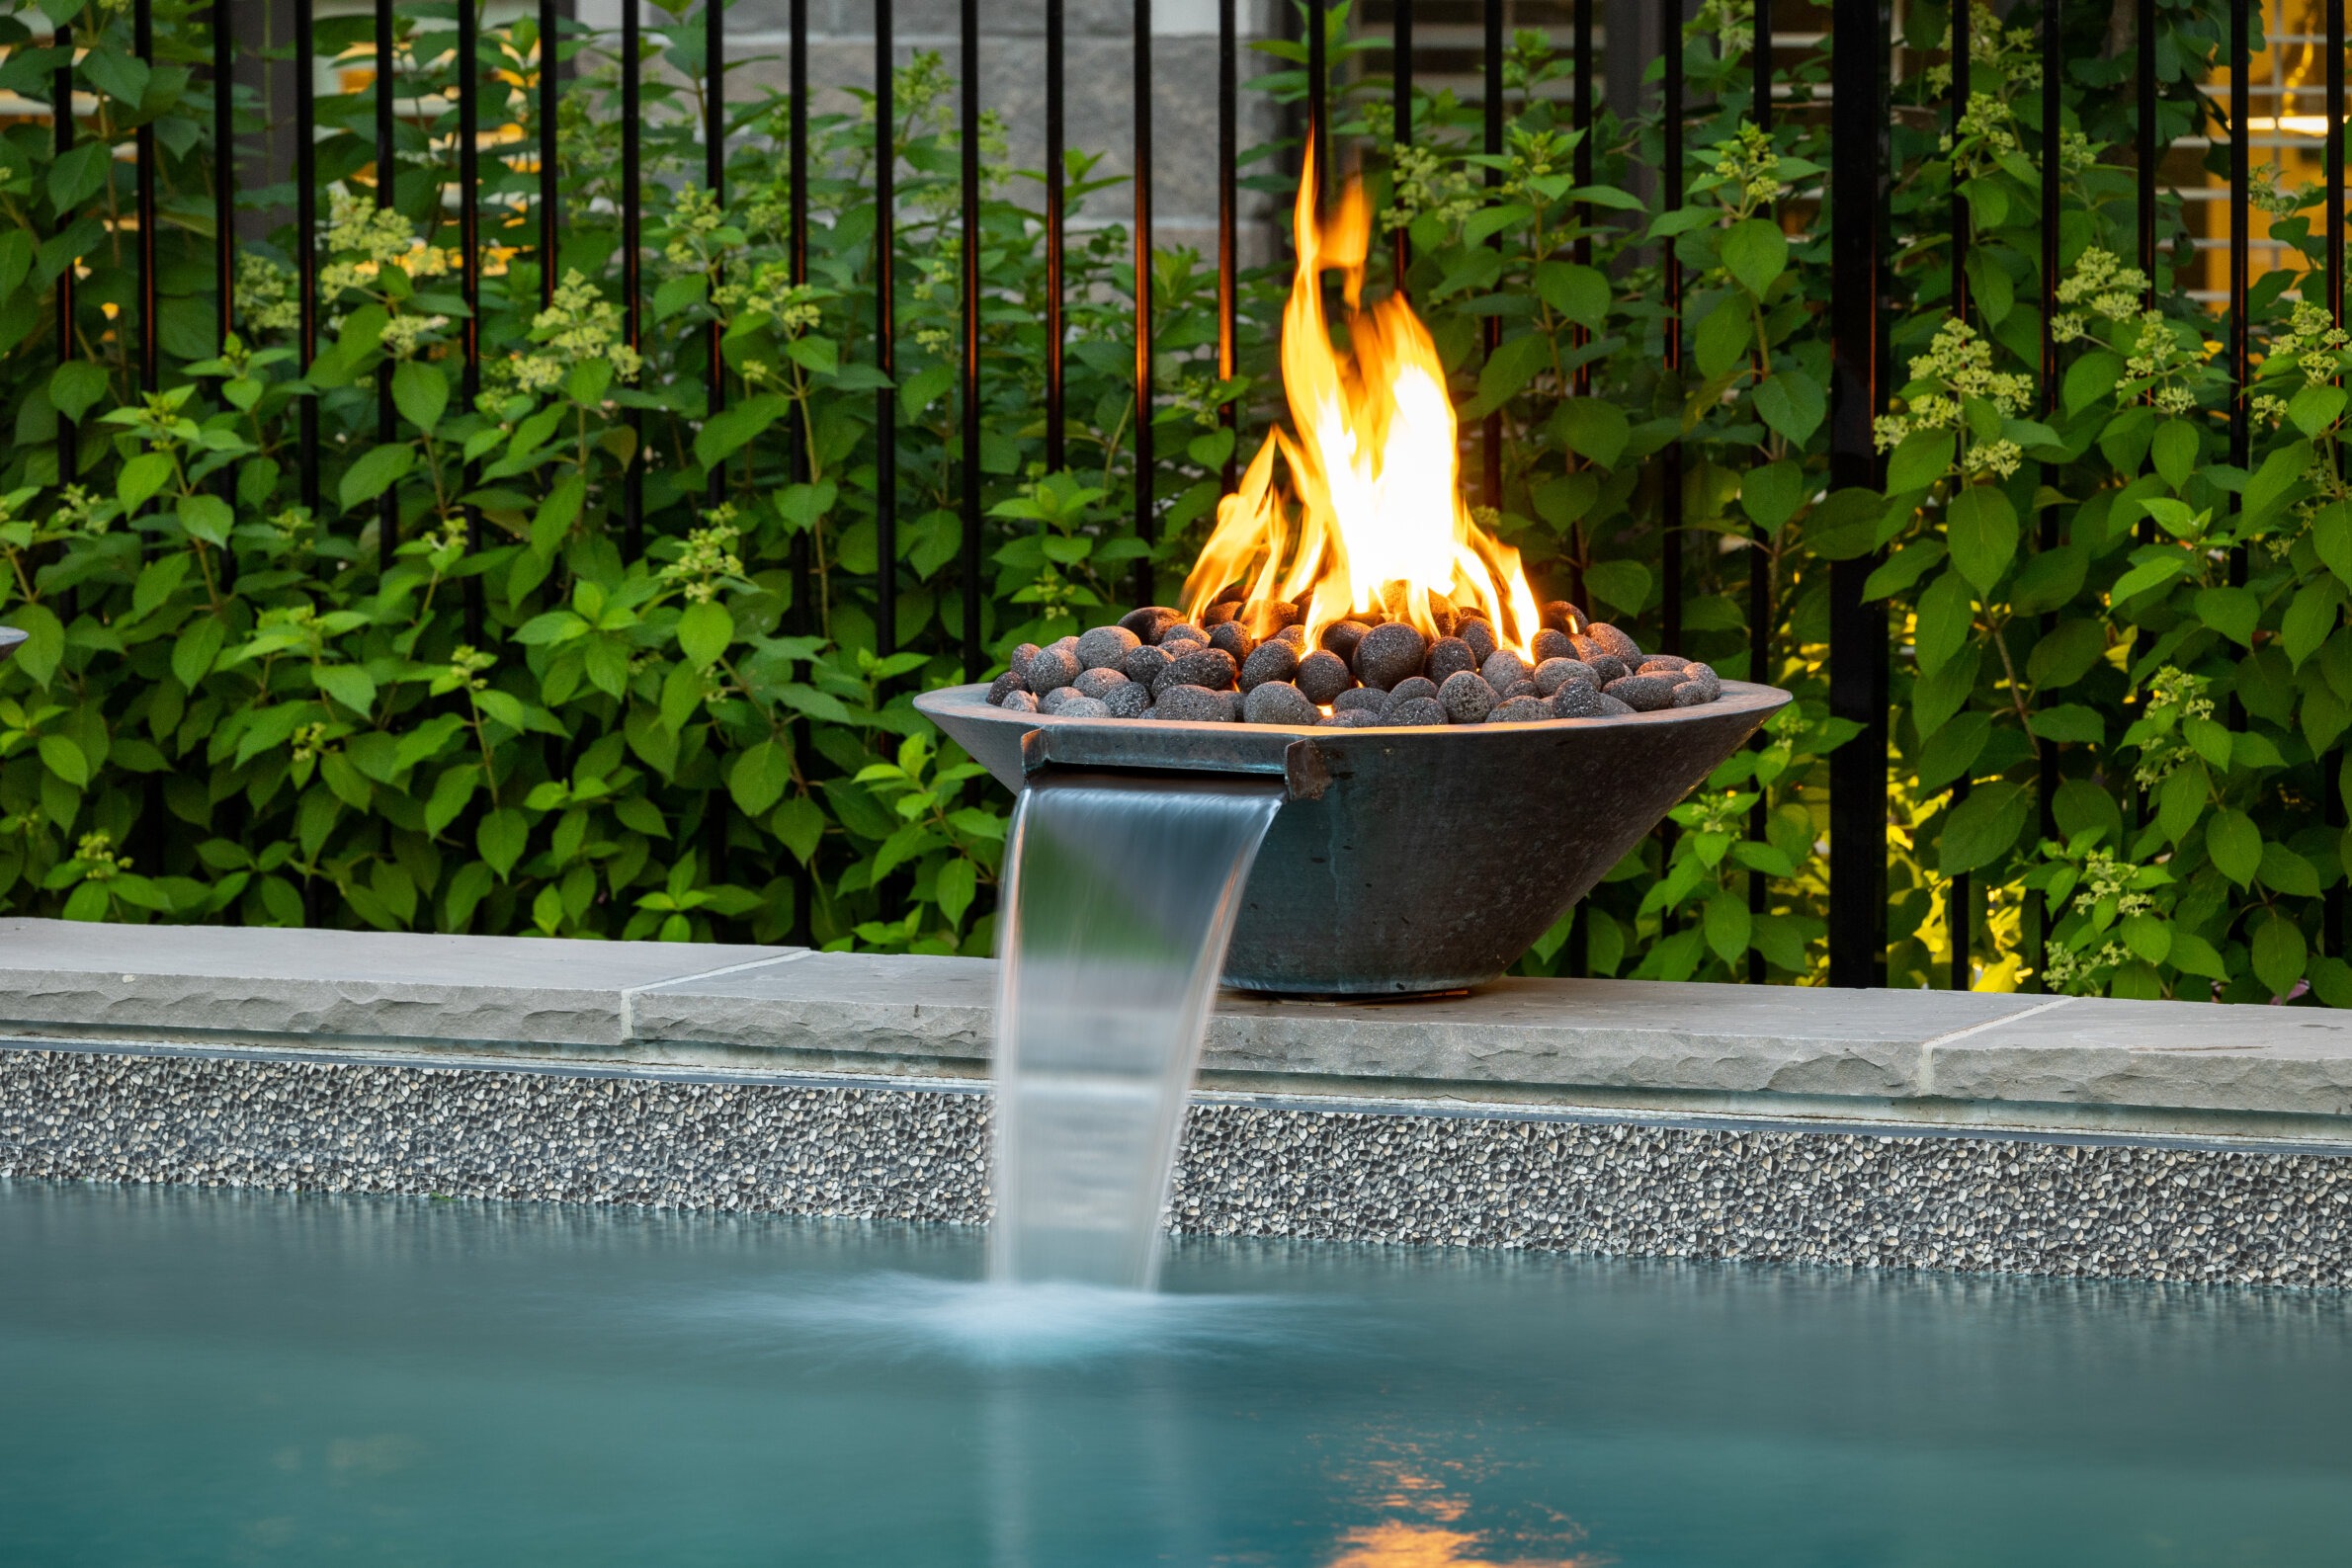 A serene outdoor setting features a fire bowl ablaze with flames atop a pedestal near a swimming pool with a smooth water feature. Green foliage backgrounds the scene.